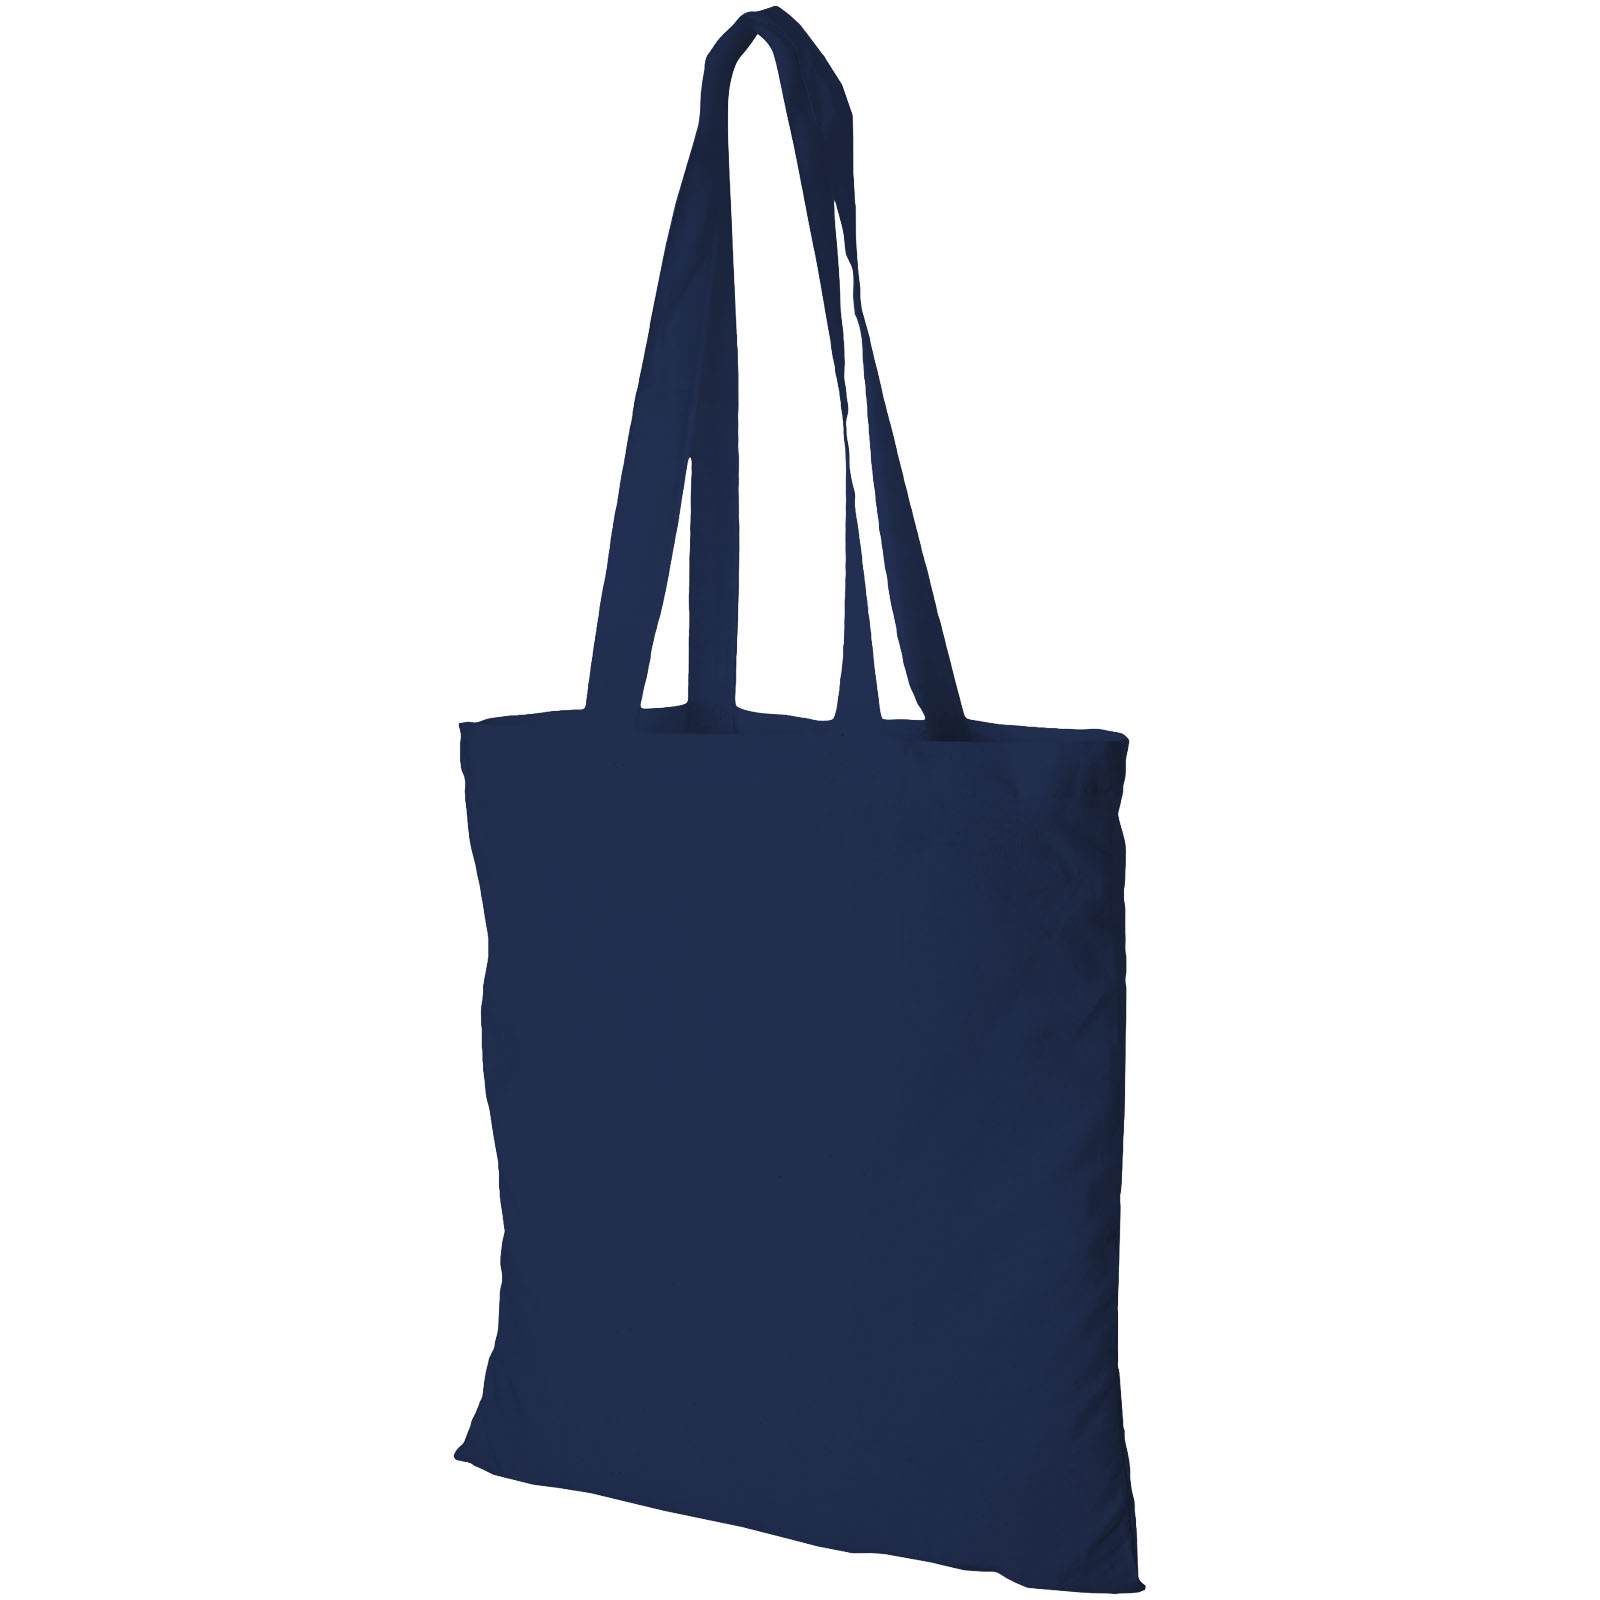 Cotton shopping bag MACKU with open main compartment